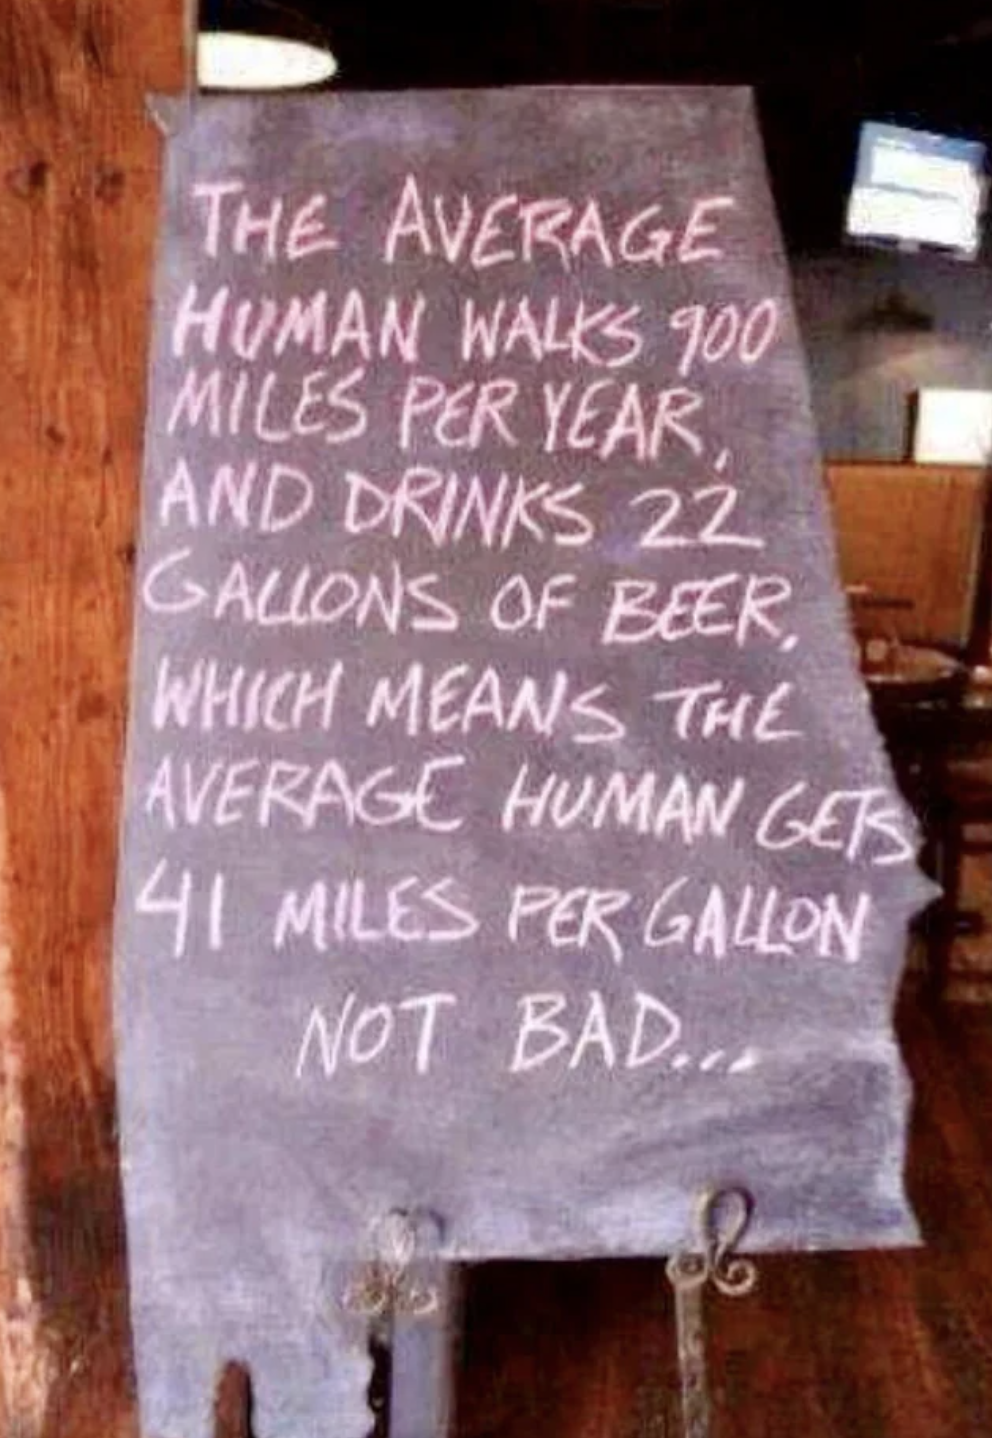 Handwritten sign: &quot;The average human walks 900 miles per year and drinks 22 gallons of beer, which means the average human gets 41 miles per gallon, not bad&quot;